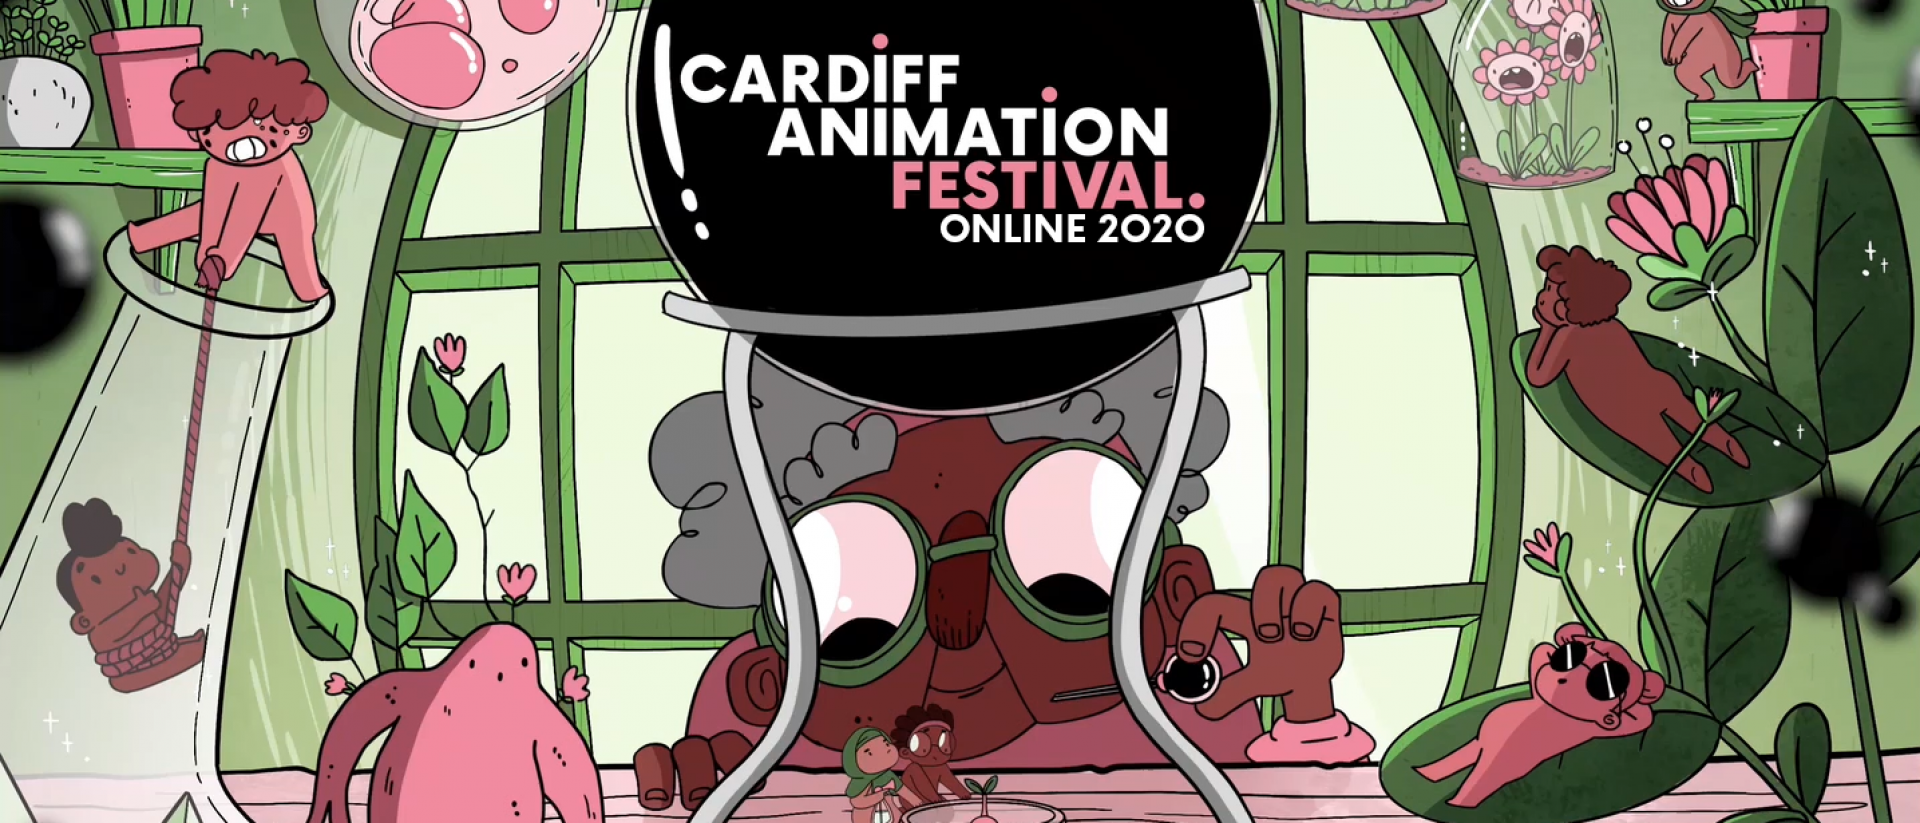 the cardiff animation festival poster